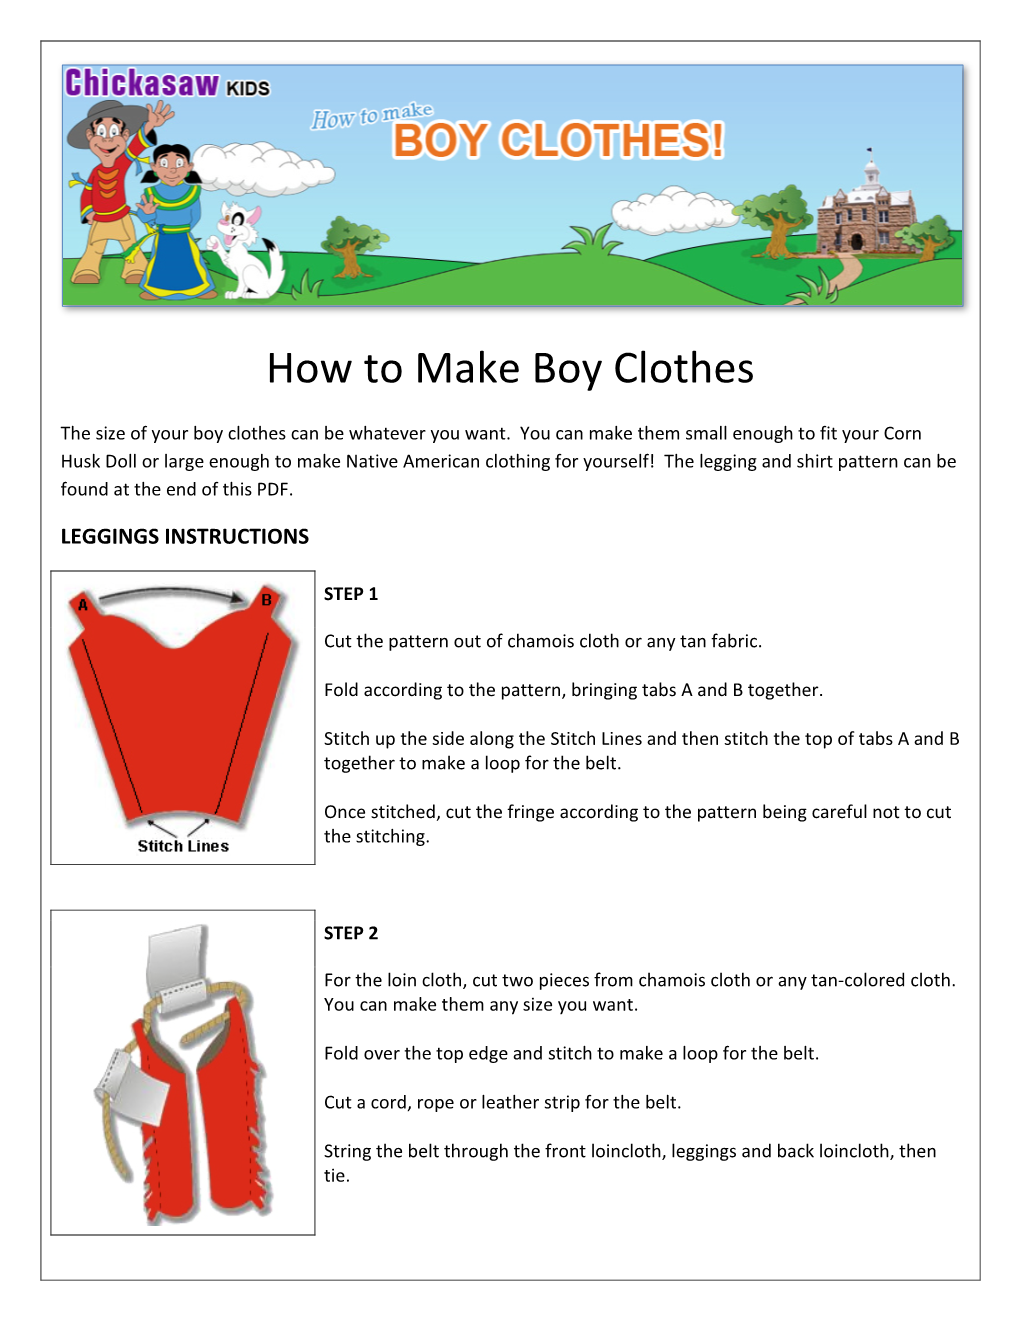 How to Make Boy Clothes